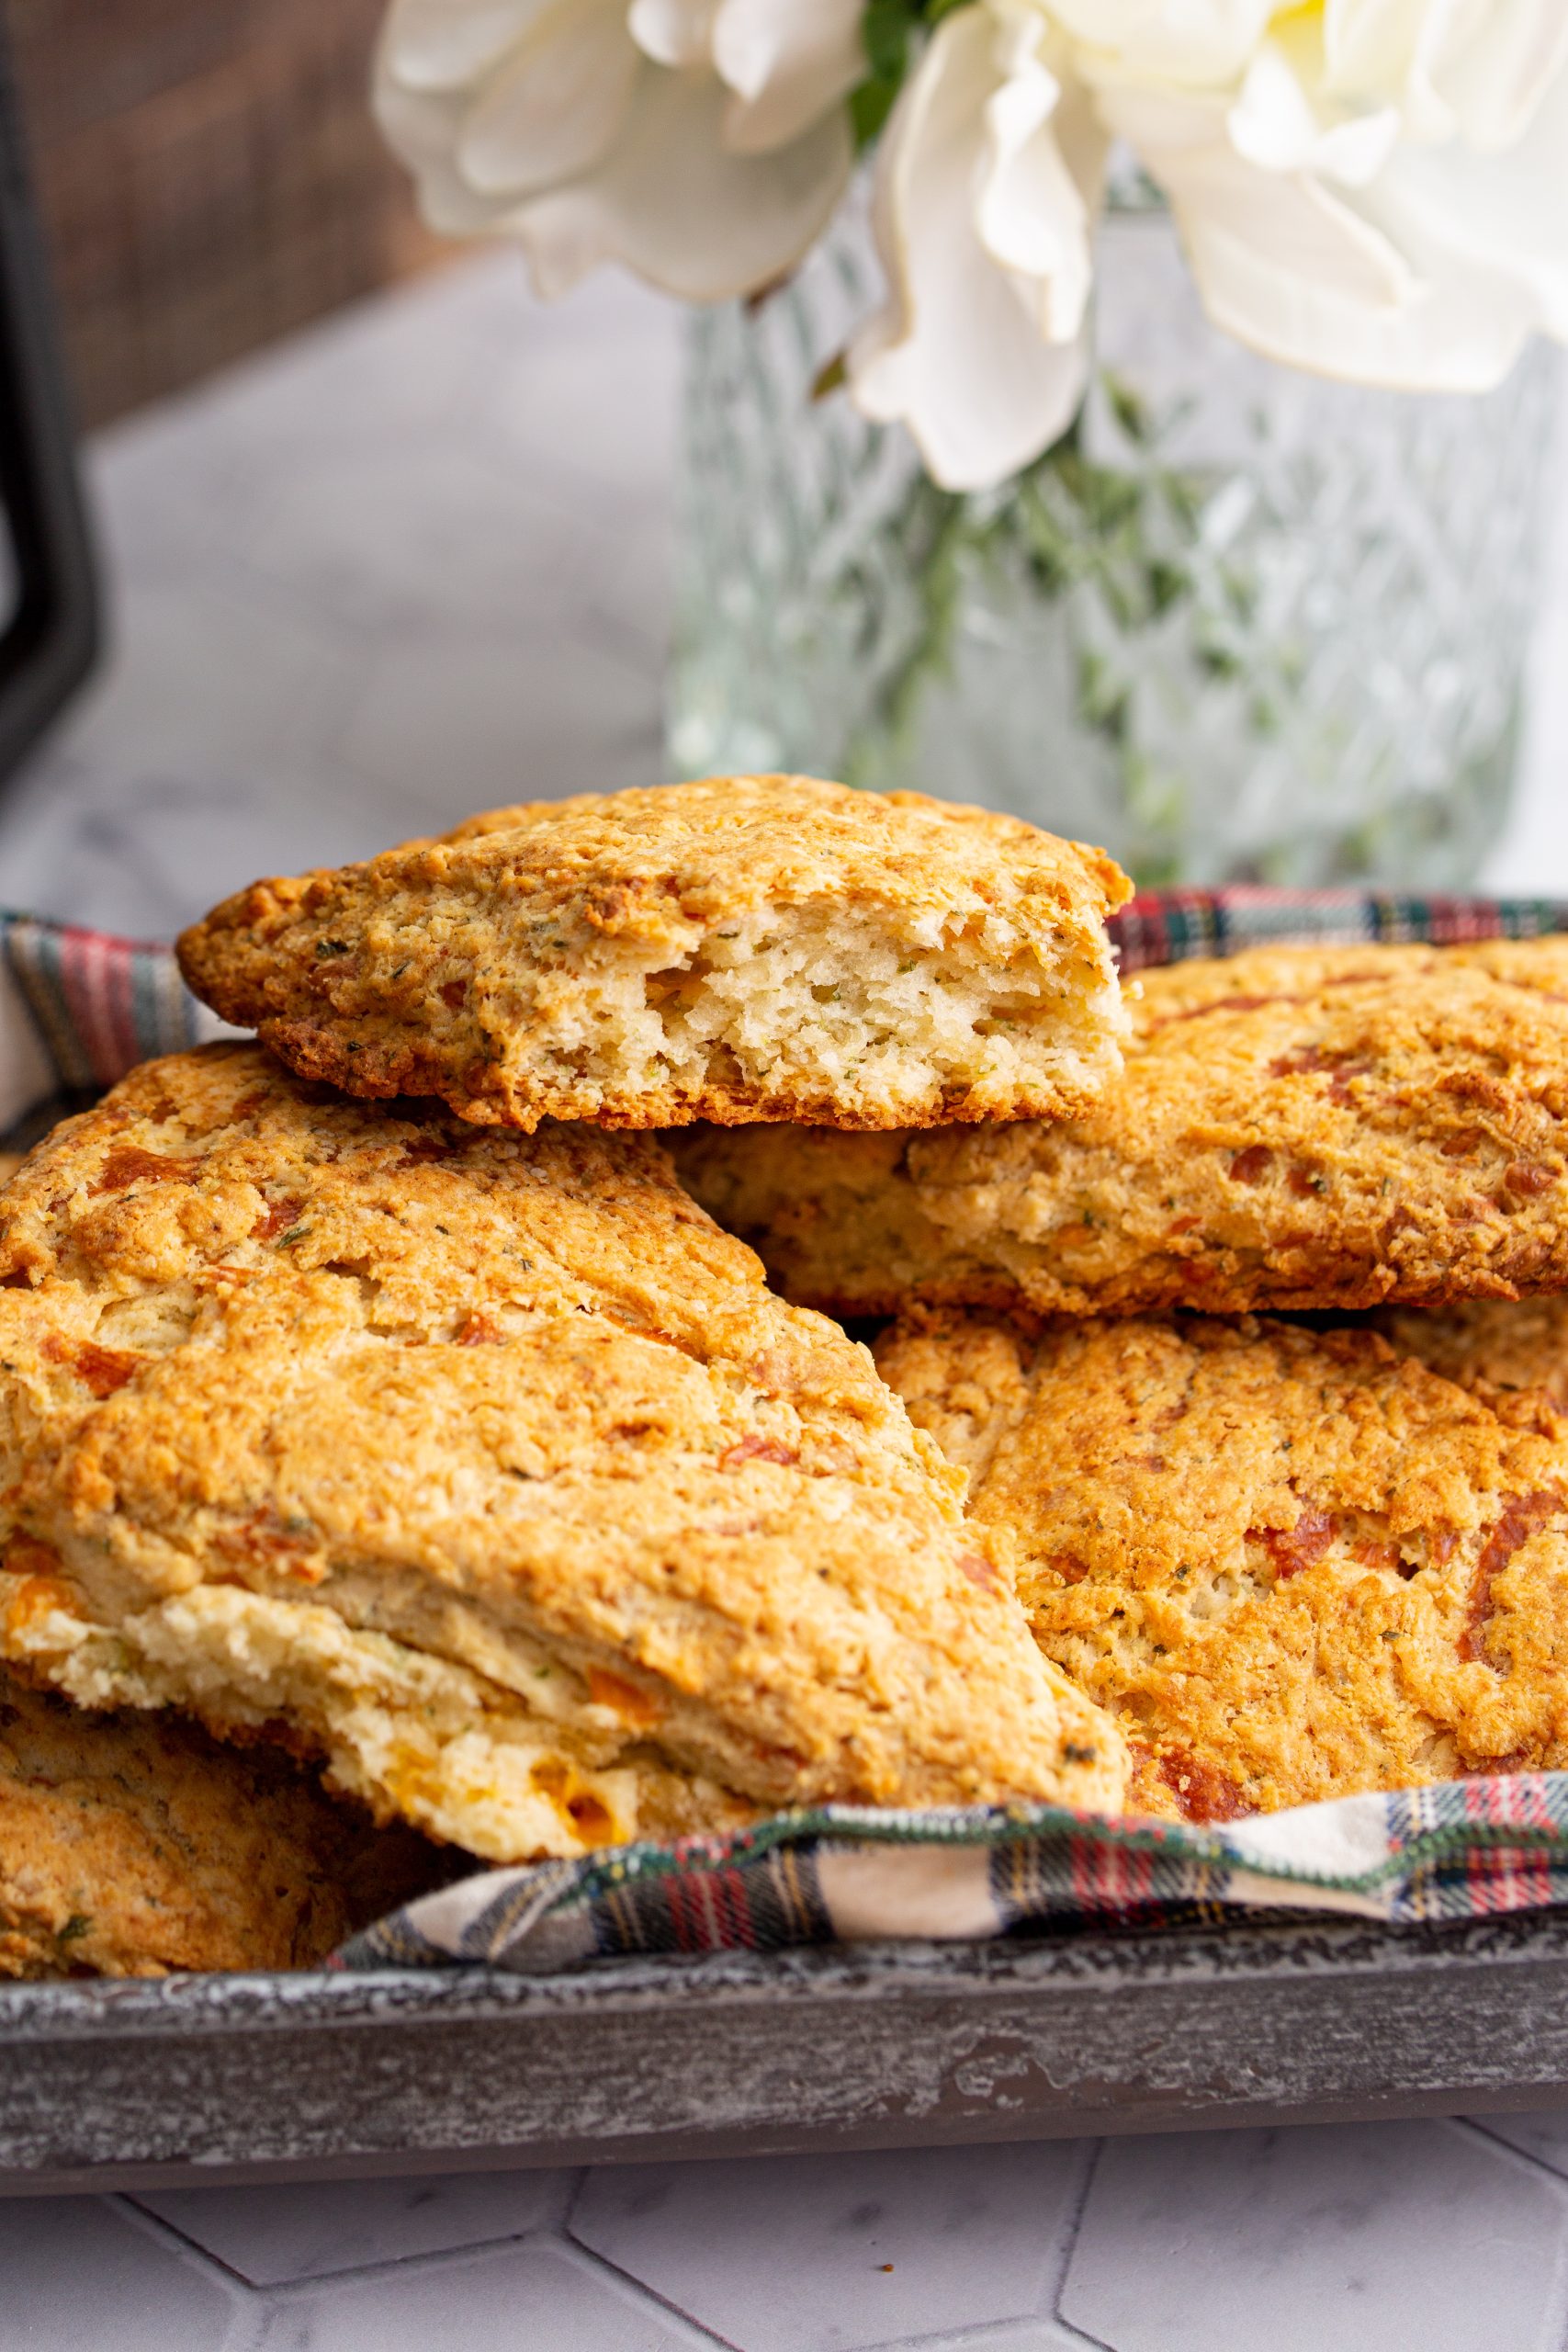 Close-up of a hand holding a half-eaten Cheddar Herb Scones, showing the crumbly interior. A tray filled with more scones and a vase of white flowers are in the background.